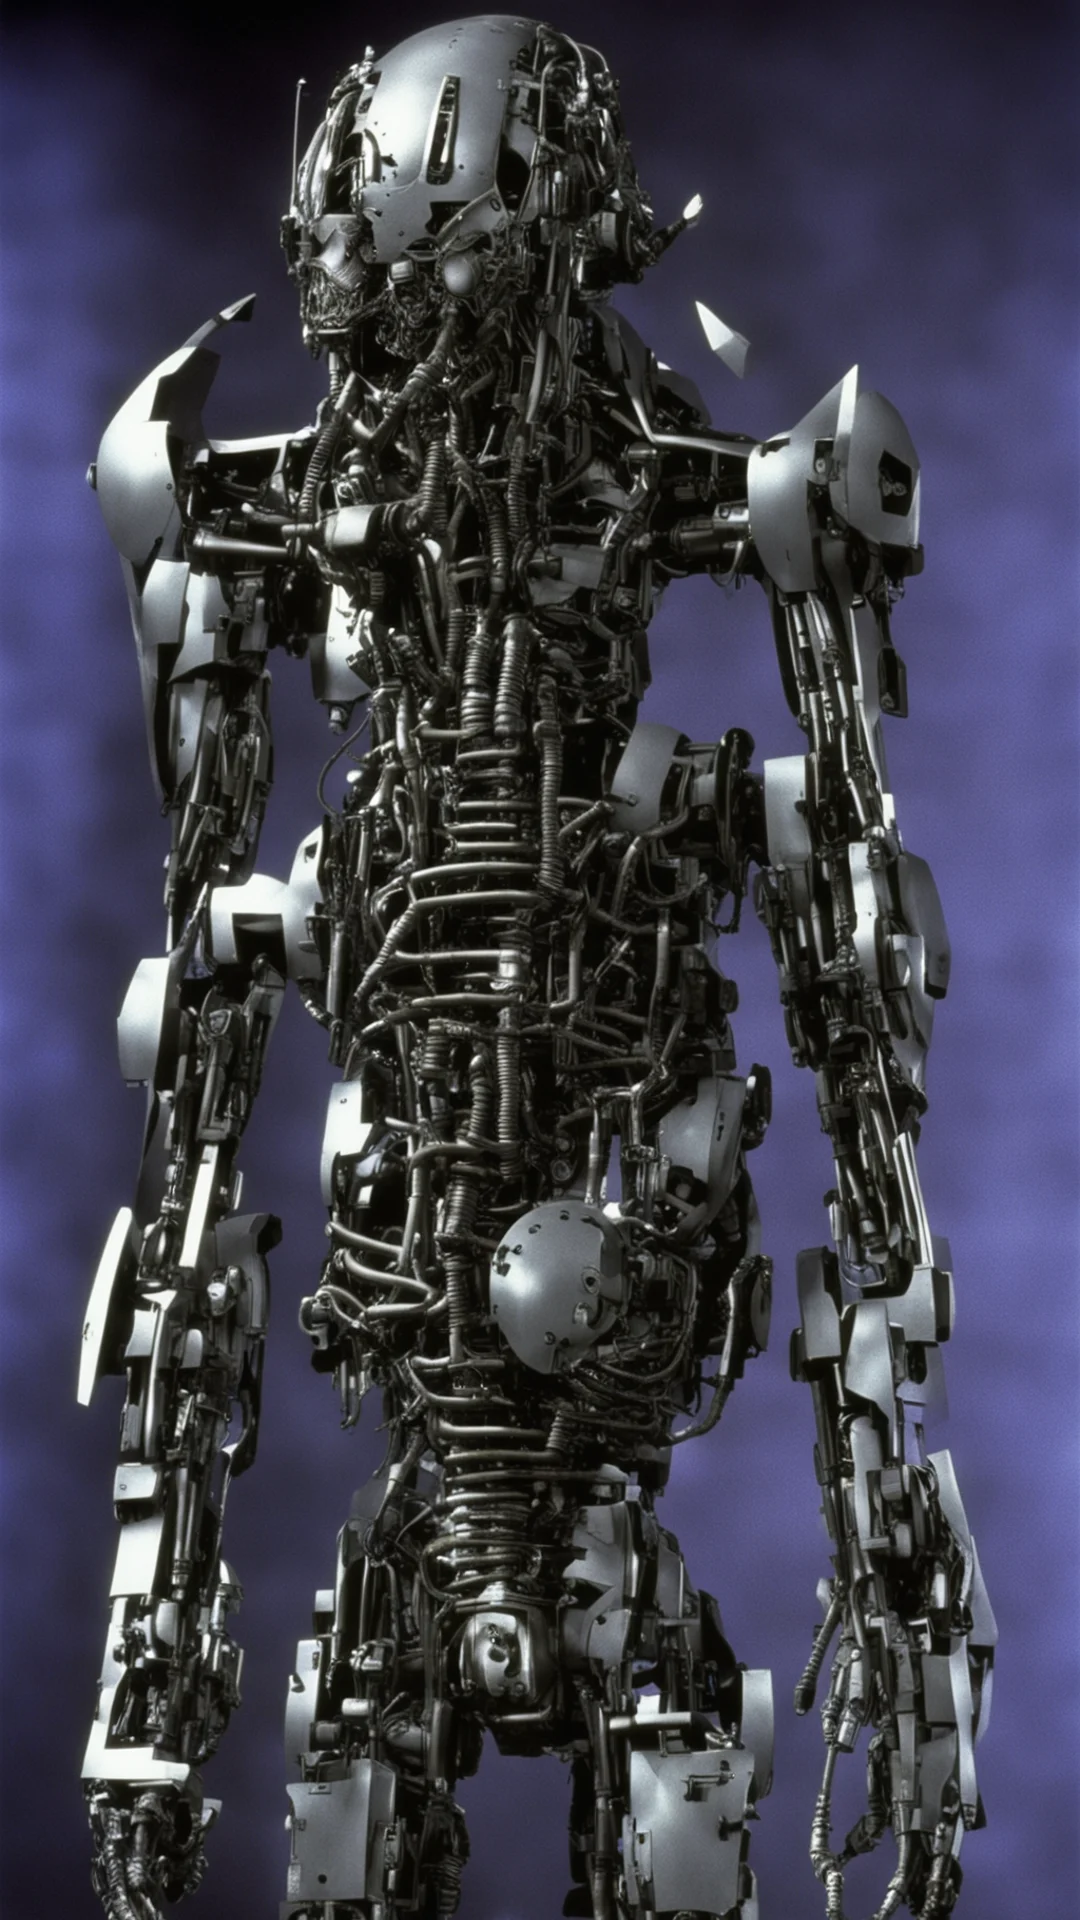 from movie event horizon 1997 from movie virus 1999 show humanoid monster robots made of machine parts and flesh render confident engaging wow artstation art 3 tall